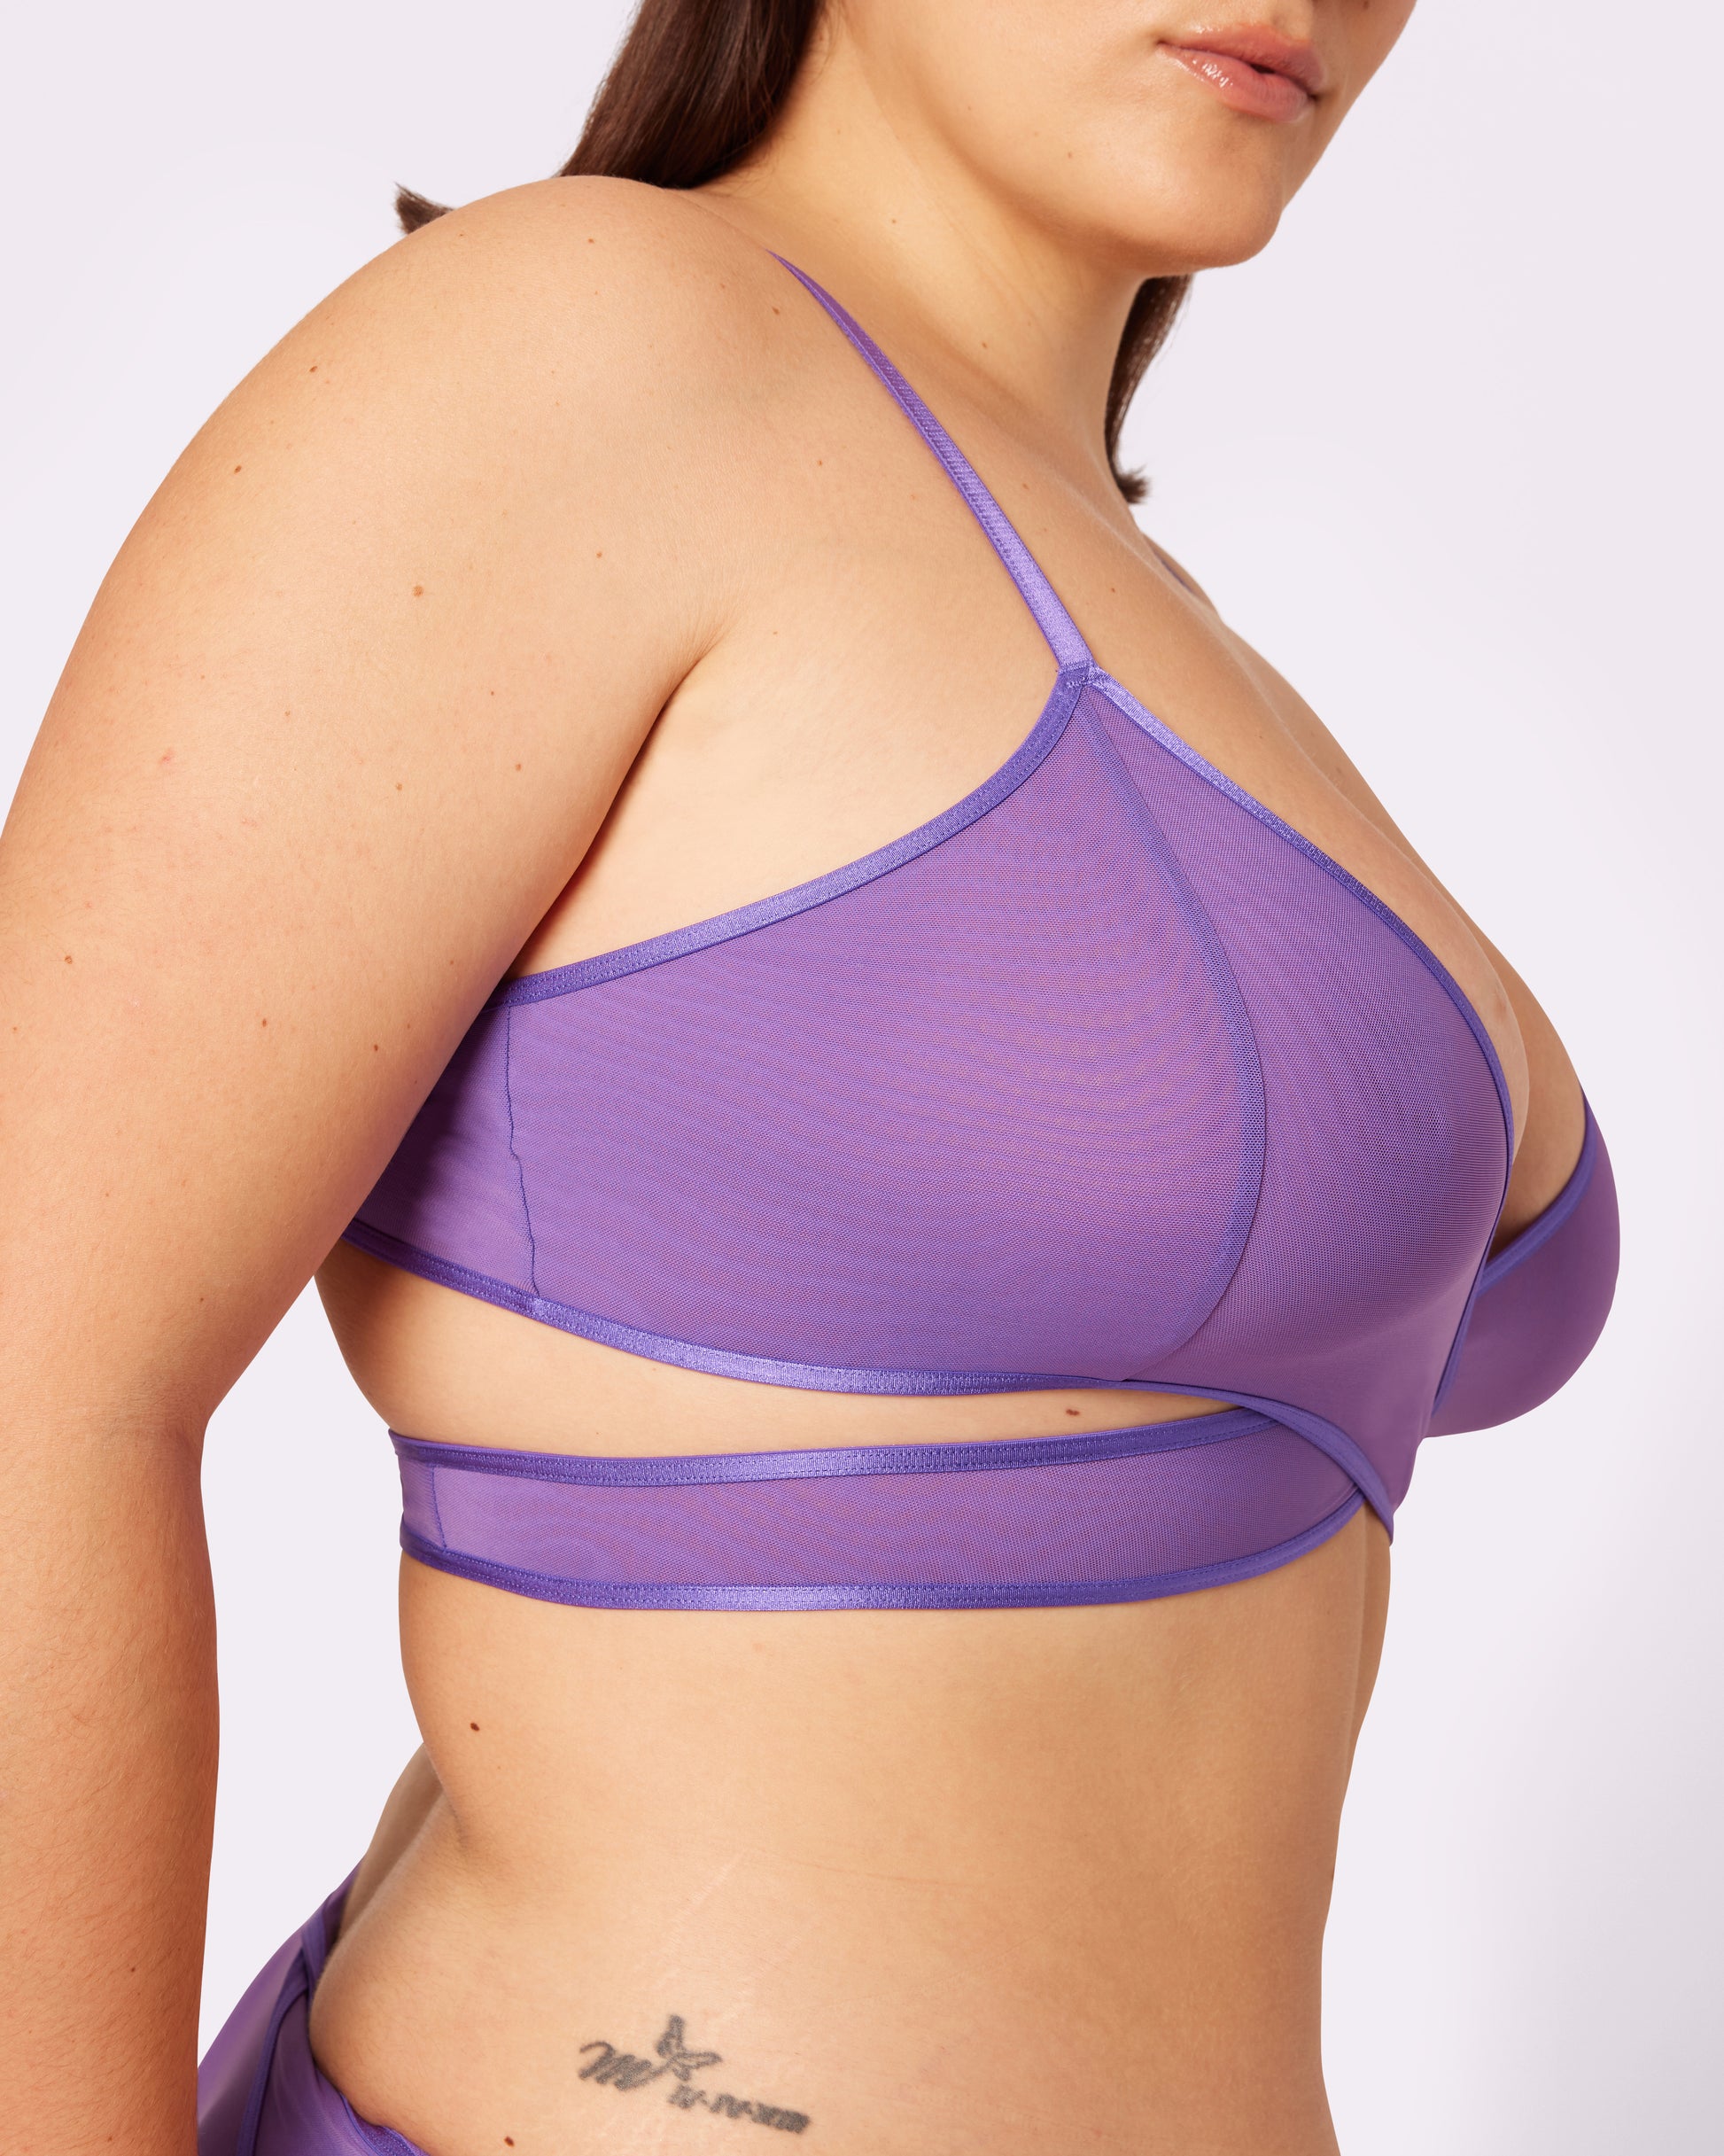 Halter Wrap Bra Purple Mesh Crisscross Bra & Underboob Cutout. Icon Wrap  Top for All Sizes. Sheer Violet Lingerie With Sexy Open Back. -  Hong  Kong